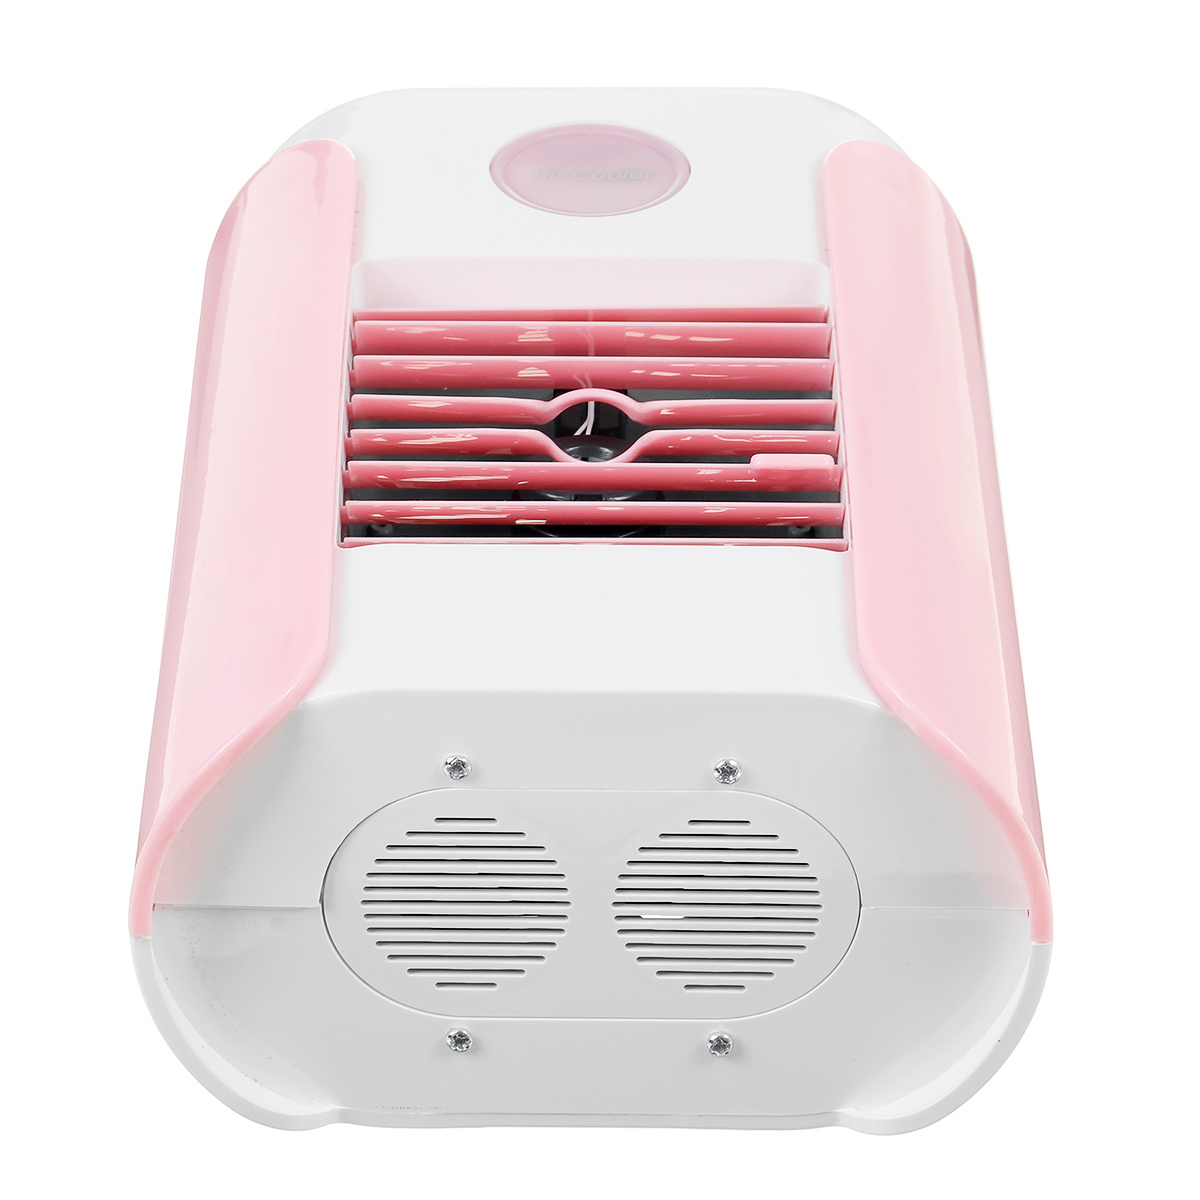 Multifunction-Humidifier-Portable-Air-Cooler-Cool-Conditioner-Conditioning-Fan-1715755-10